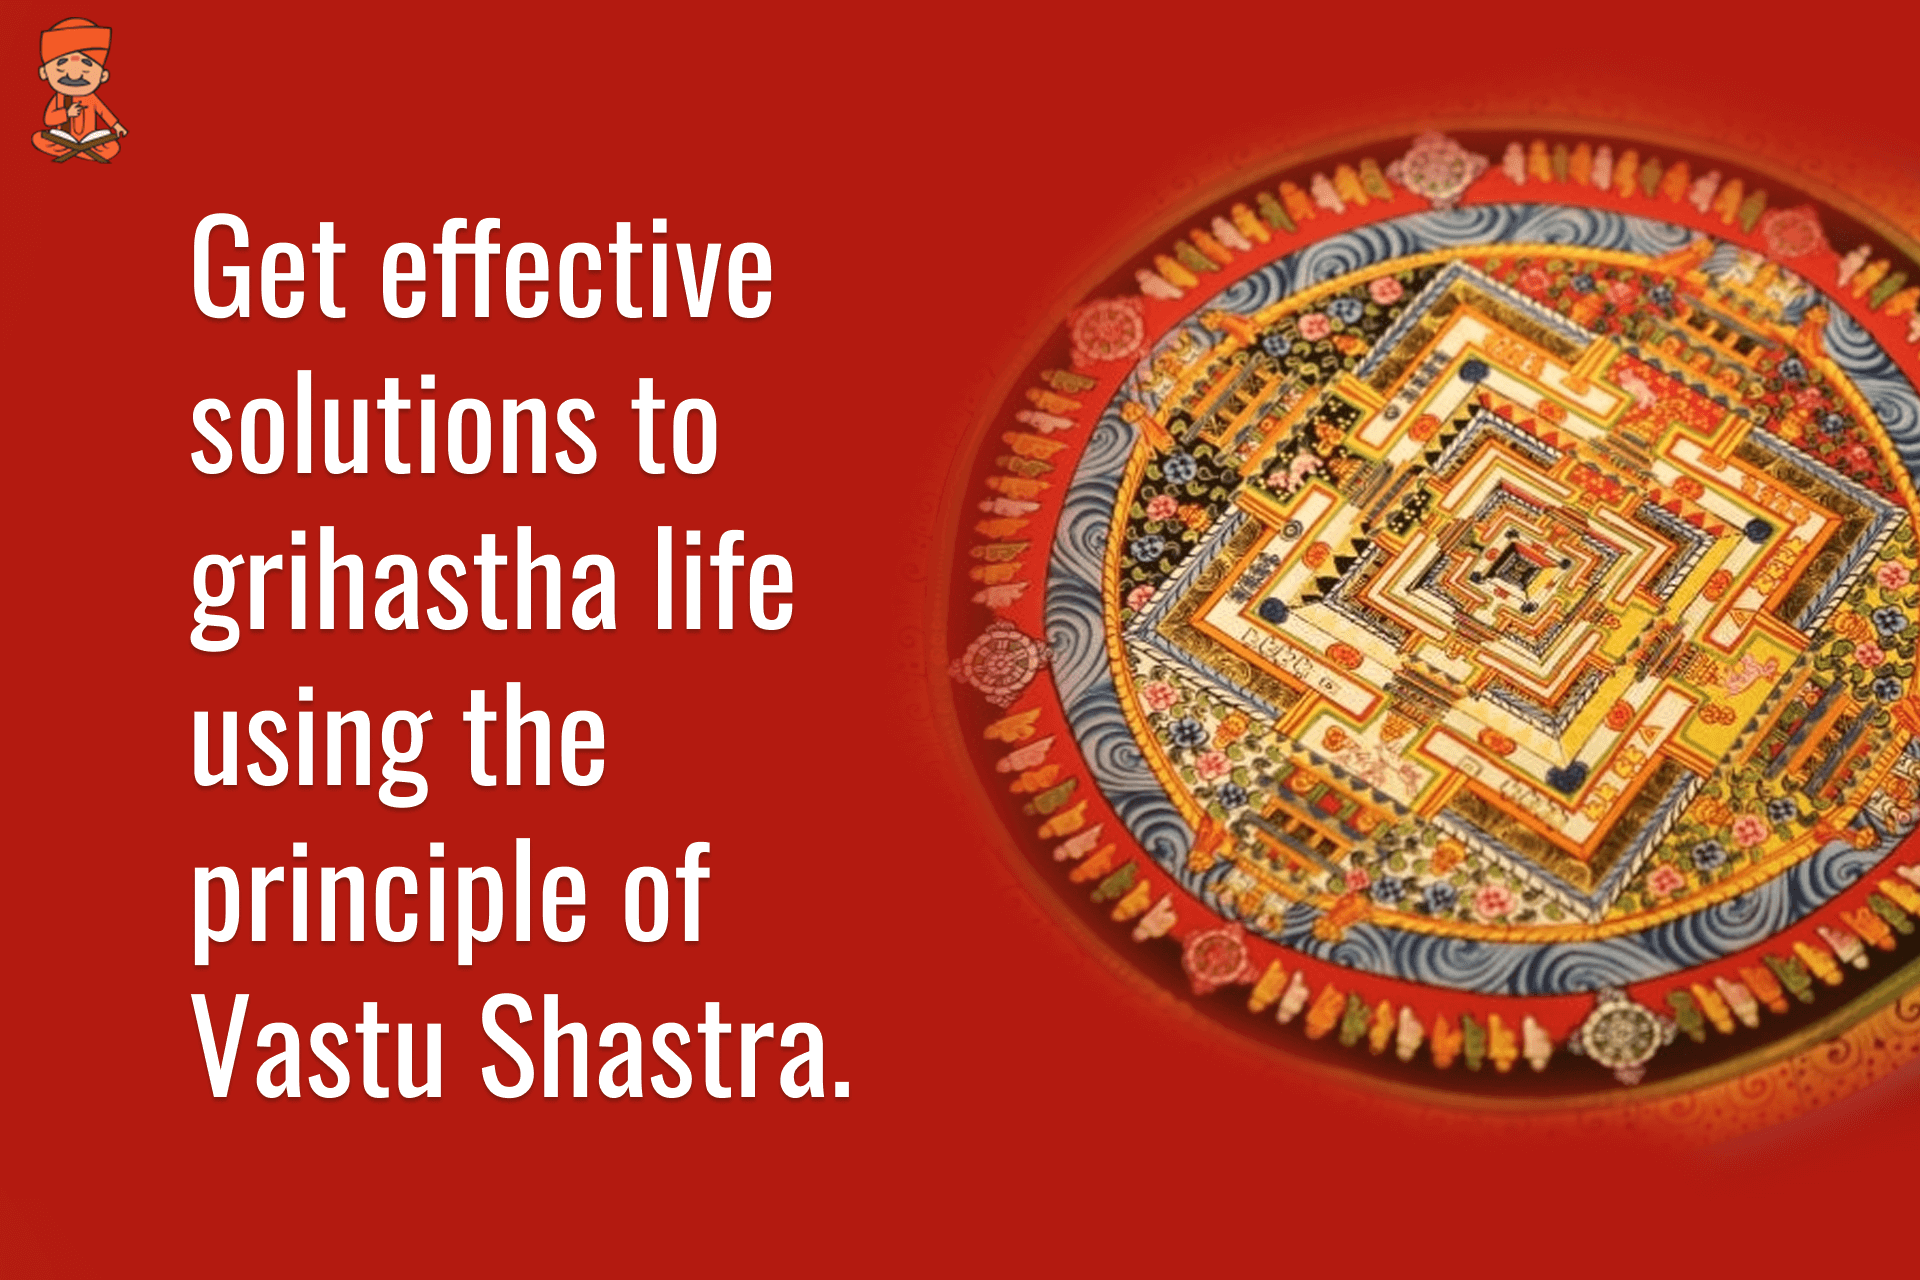 Get Effective Solutions to Grihastha Life Using the Principle of Vastu Shastra